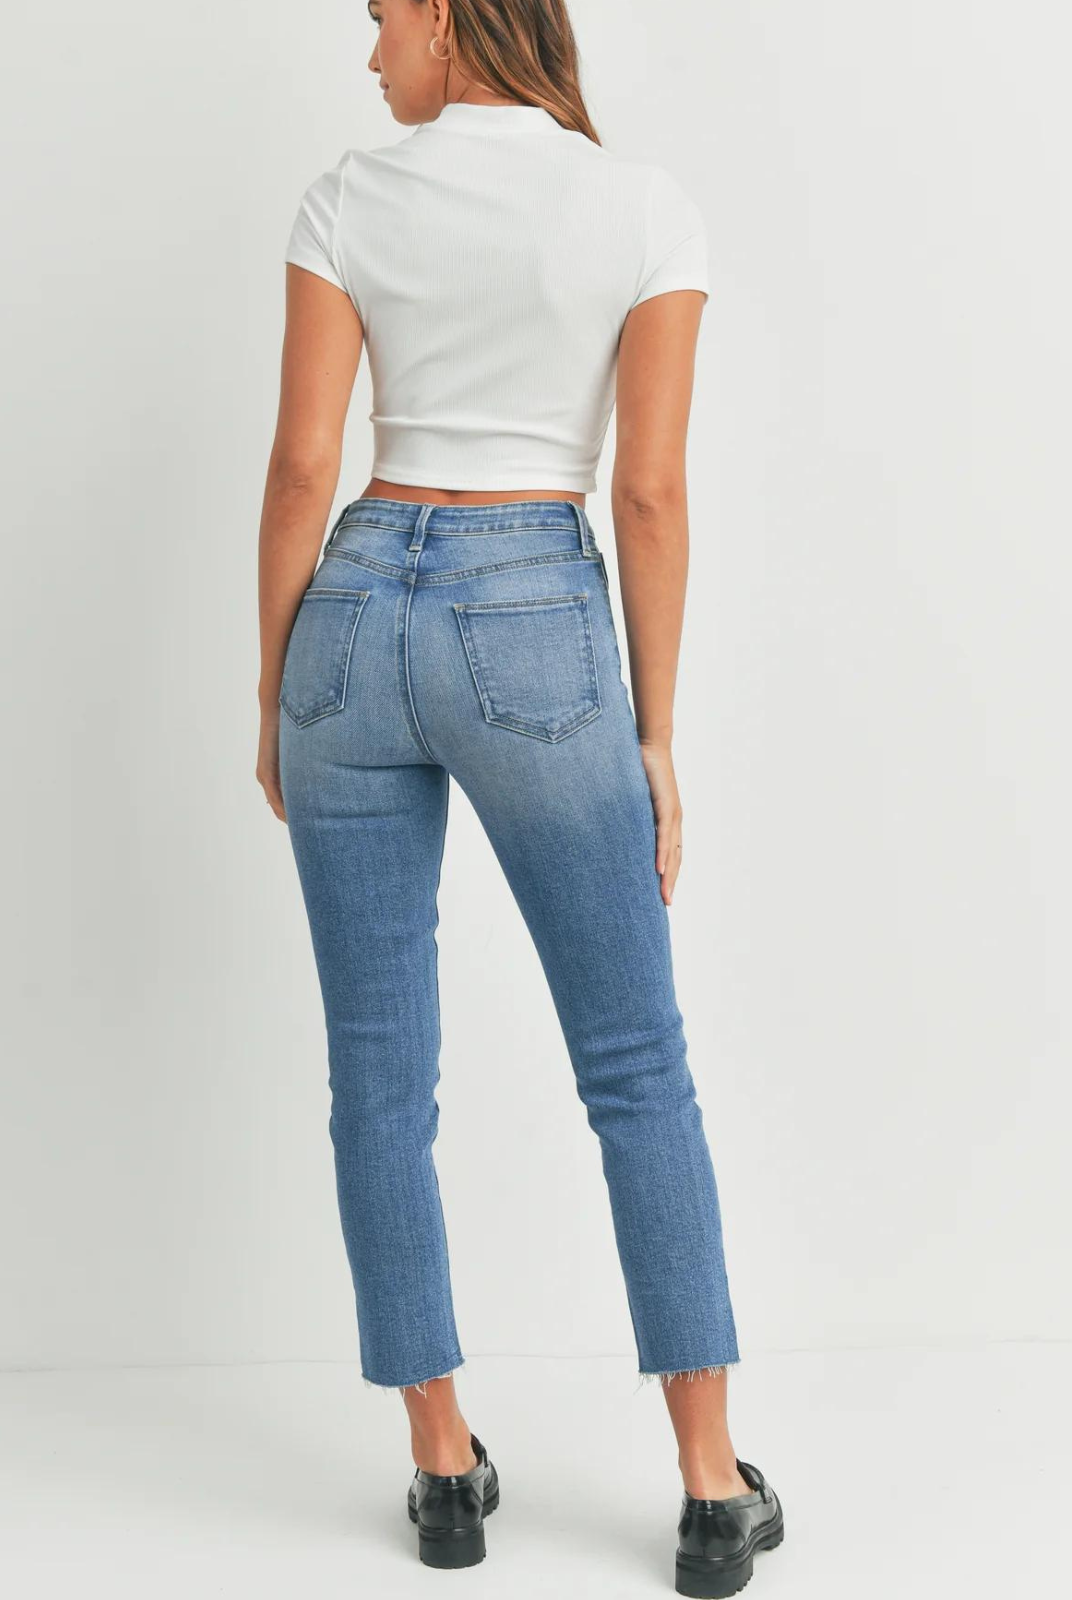 Just Black Denim Keynote Jean. A straight jean that's as versatile as it is comfortable. A medium rinse and medium-rise waist flatter a straight leg with an optic white option, that hits just above your ankle for an on-trend sillouhette.